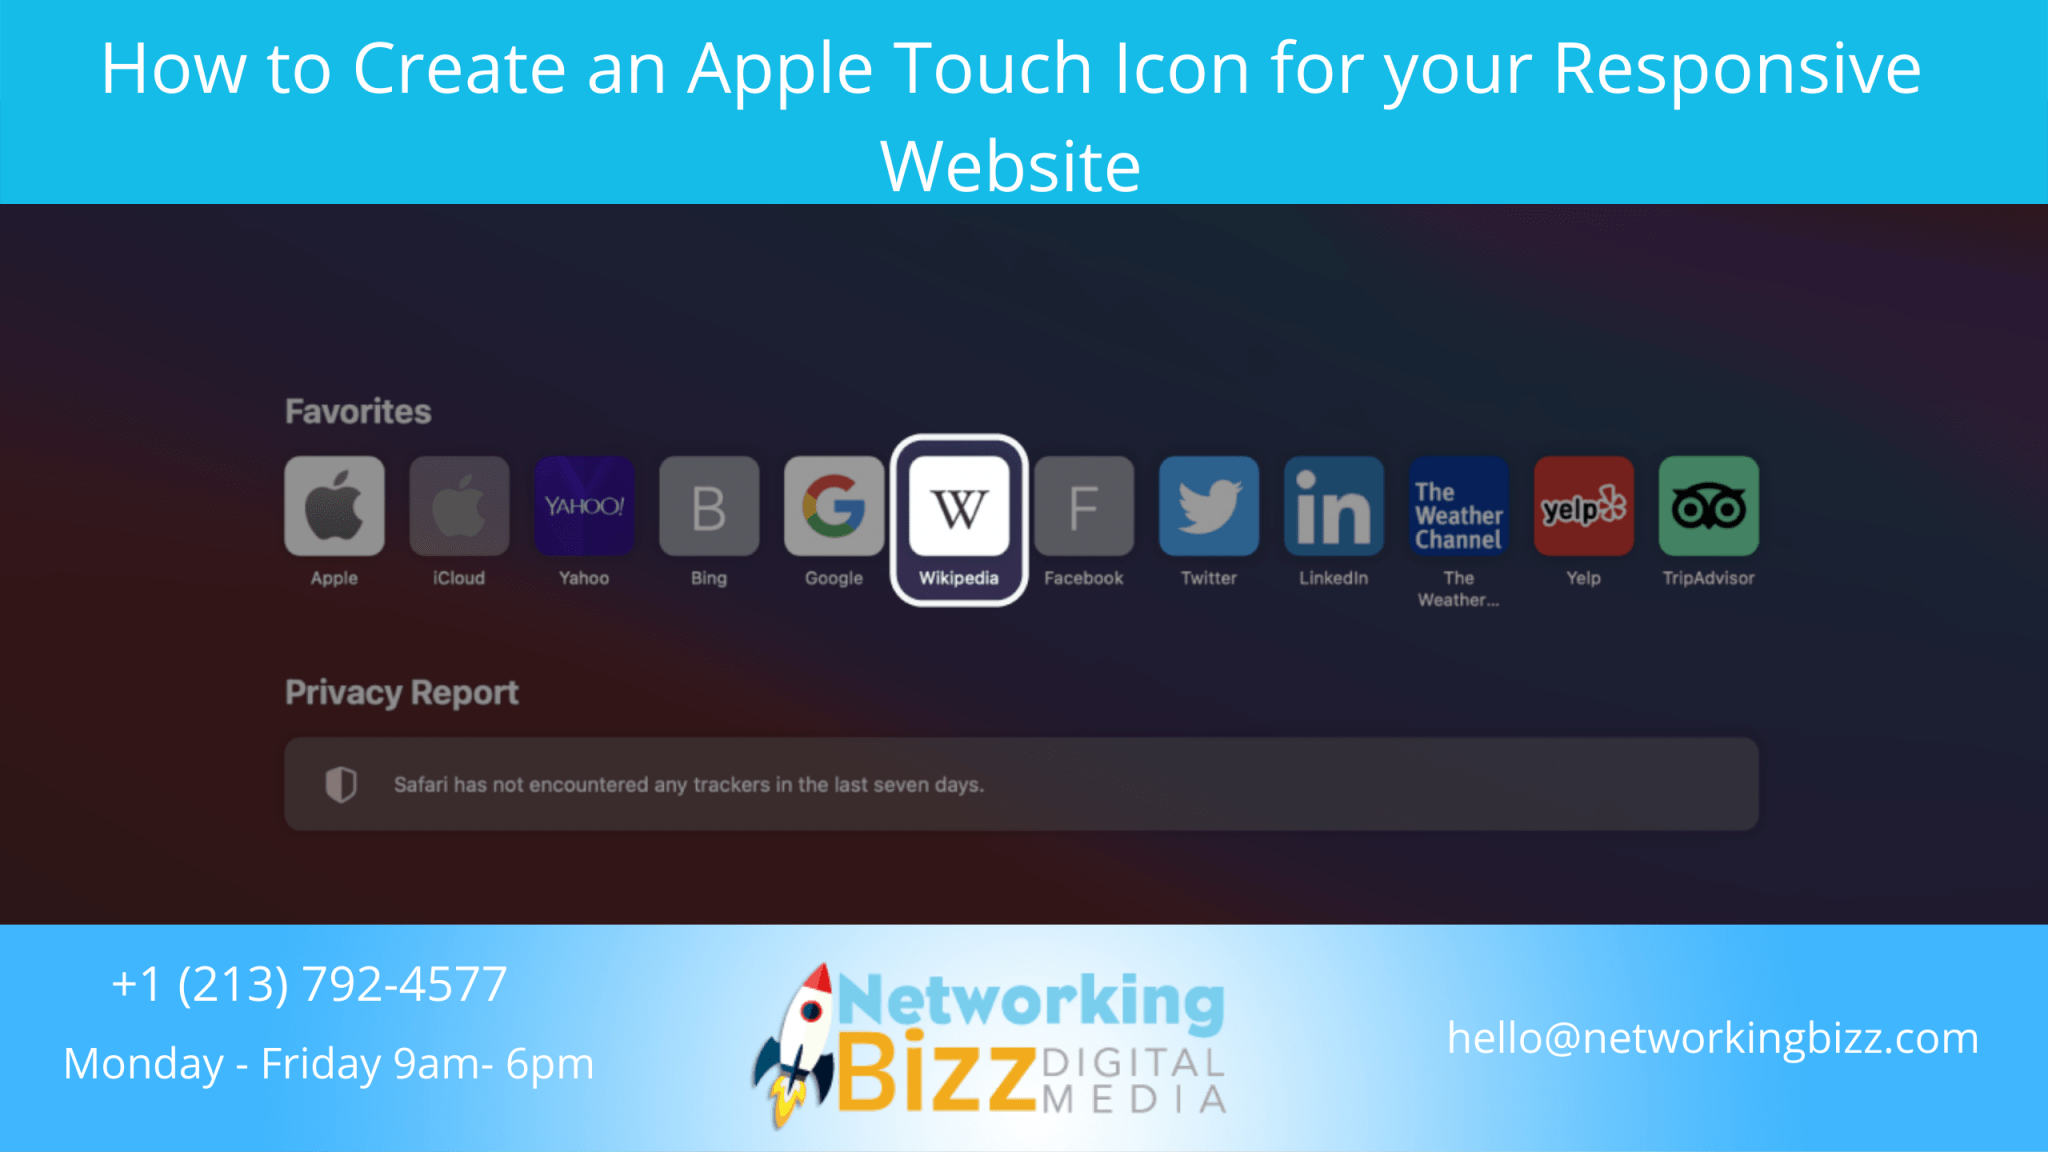 How to Create an Apple Touch Icon for your Responsive Website